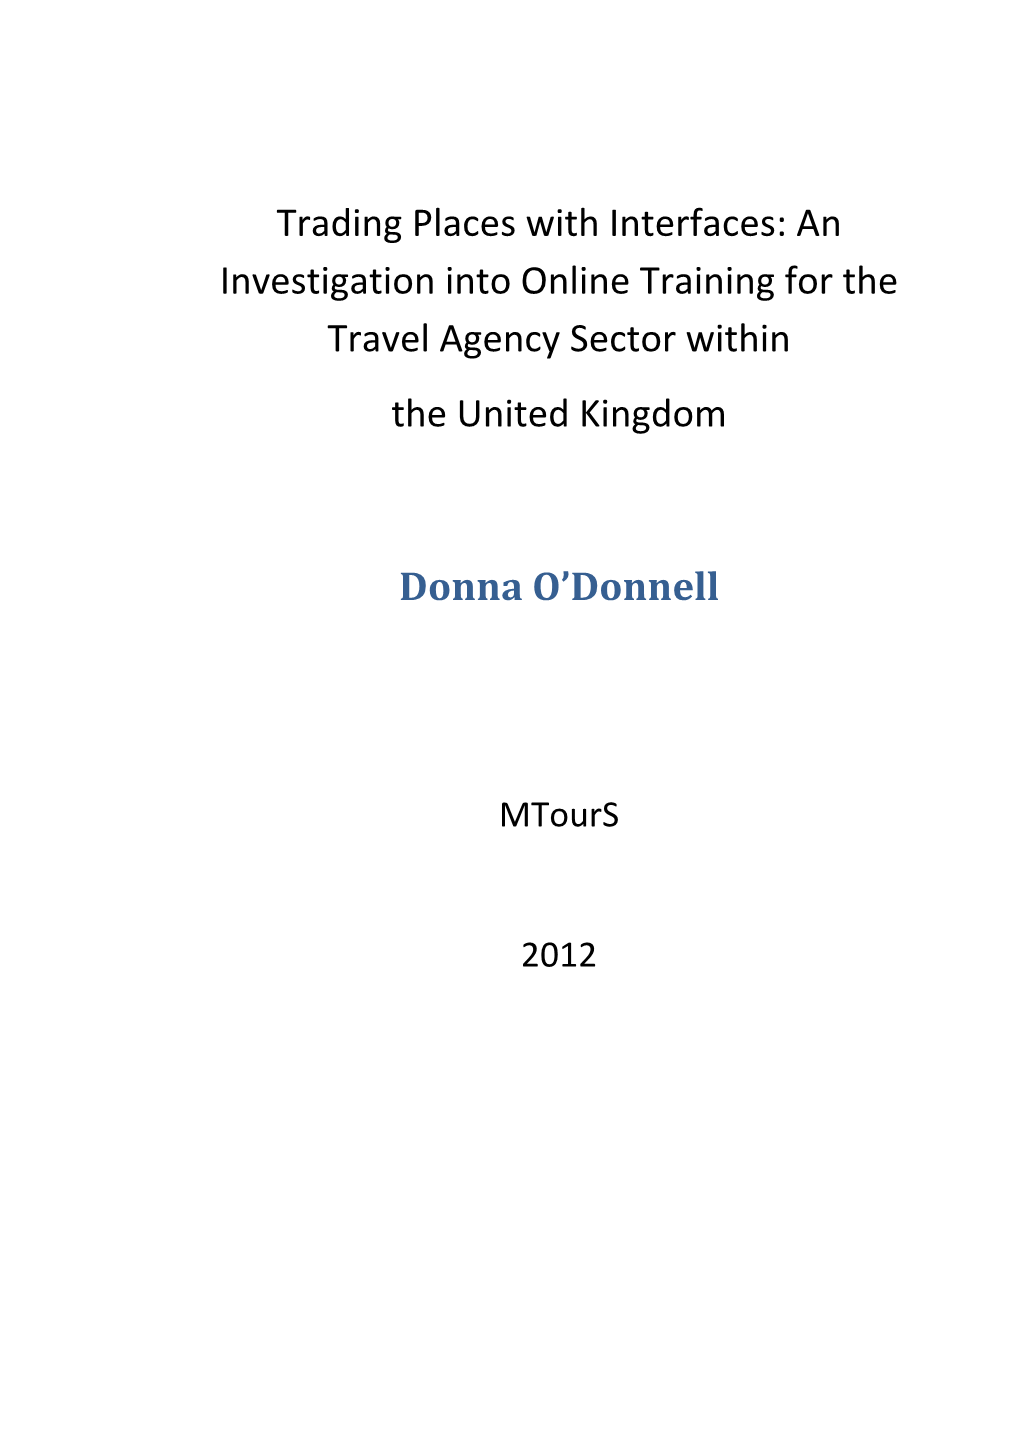 An Investigation Into Online Training for the Travel Agency Sector Within the United Kingdom